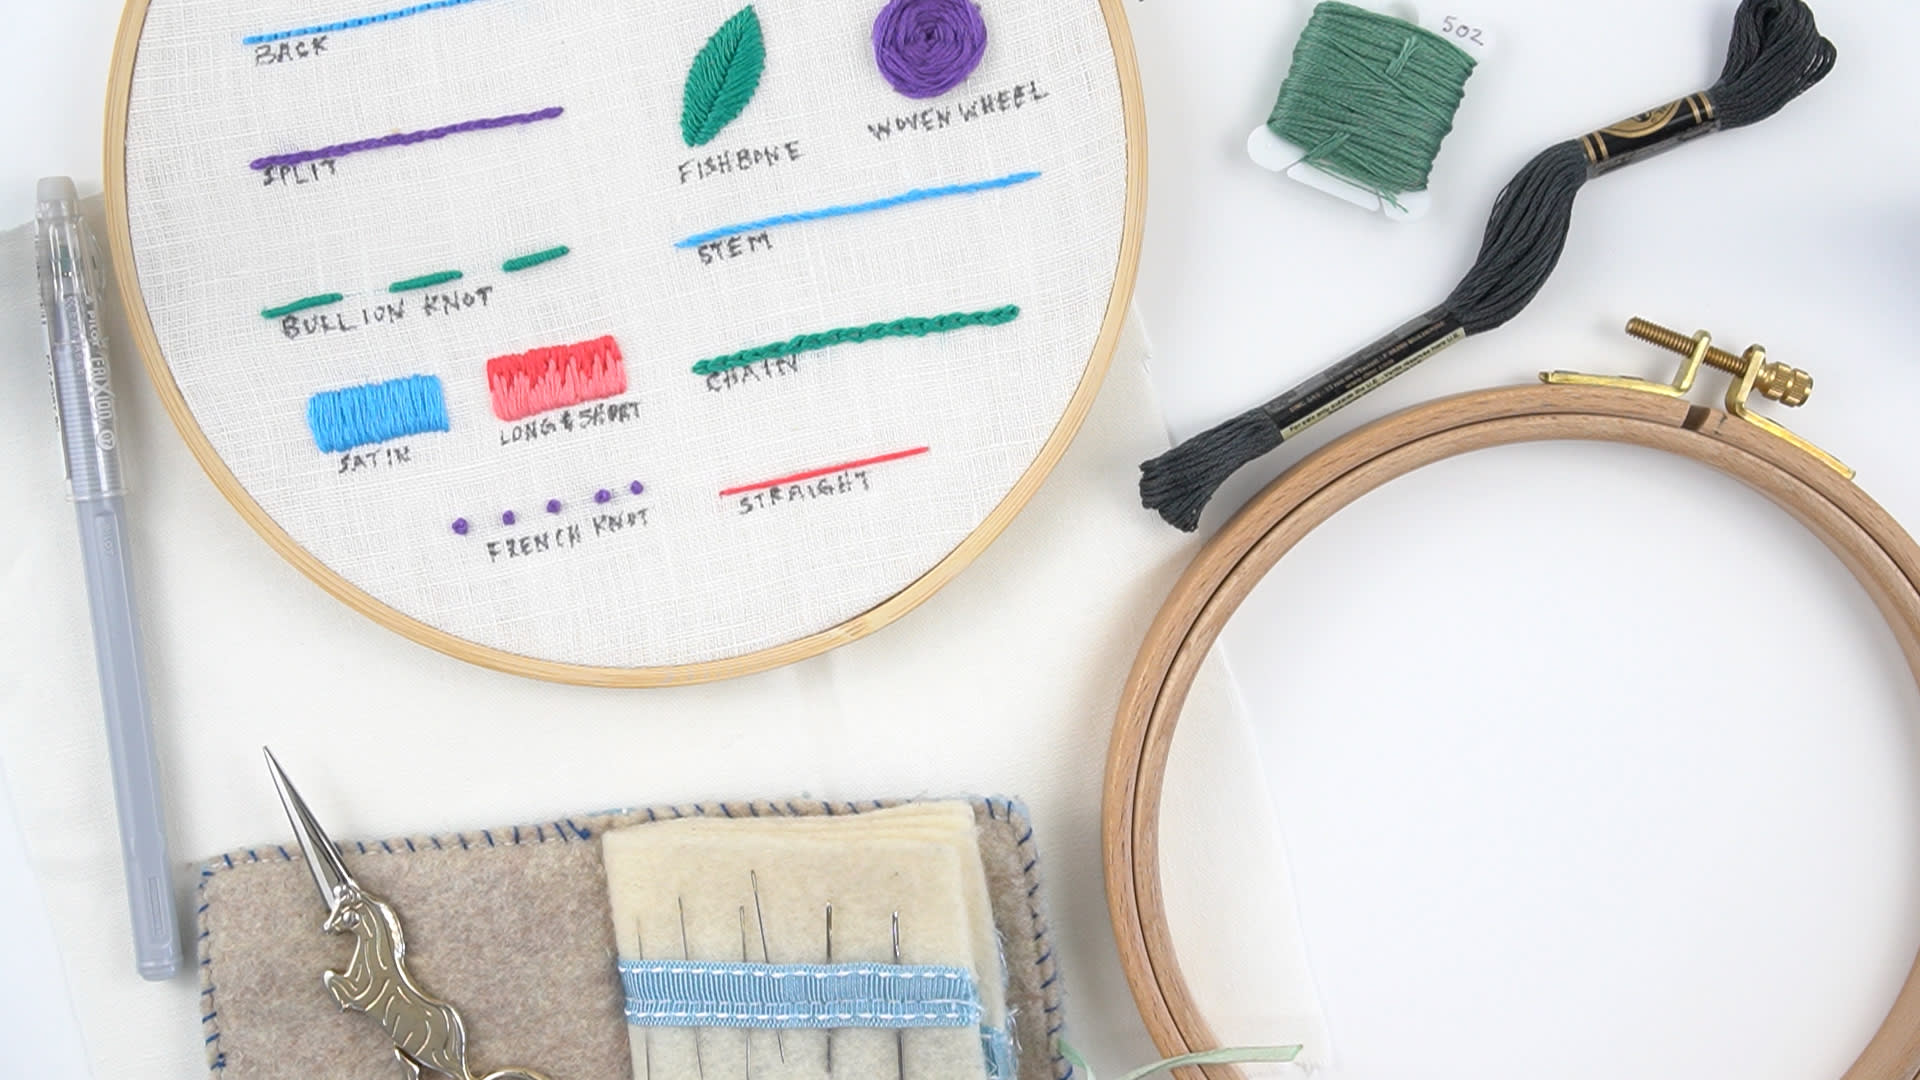 Machine embroidery for beginners: what supplies you need